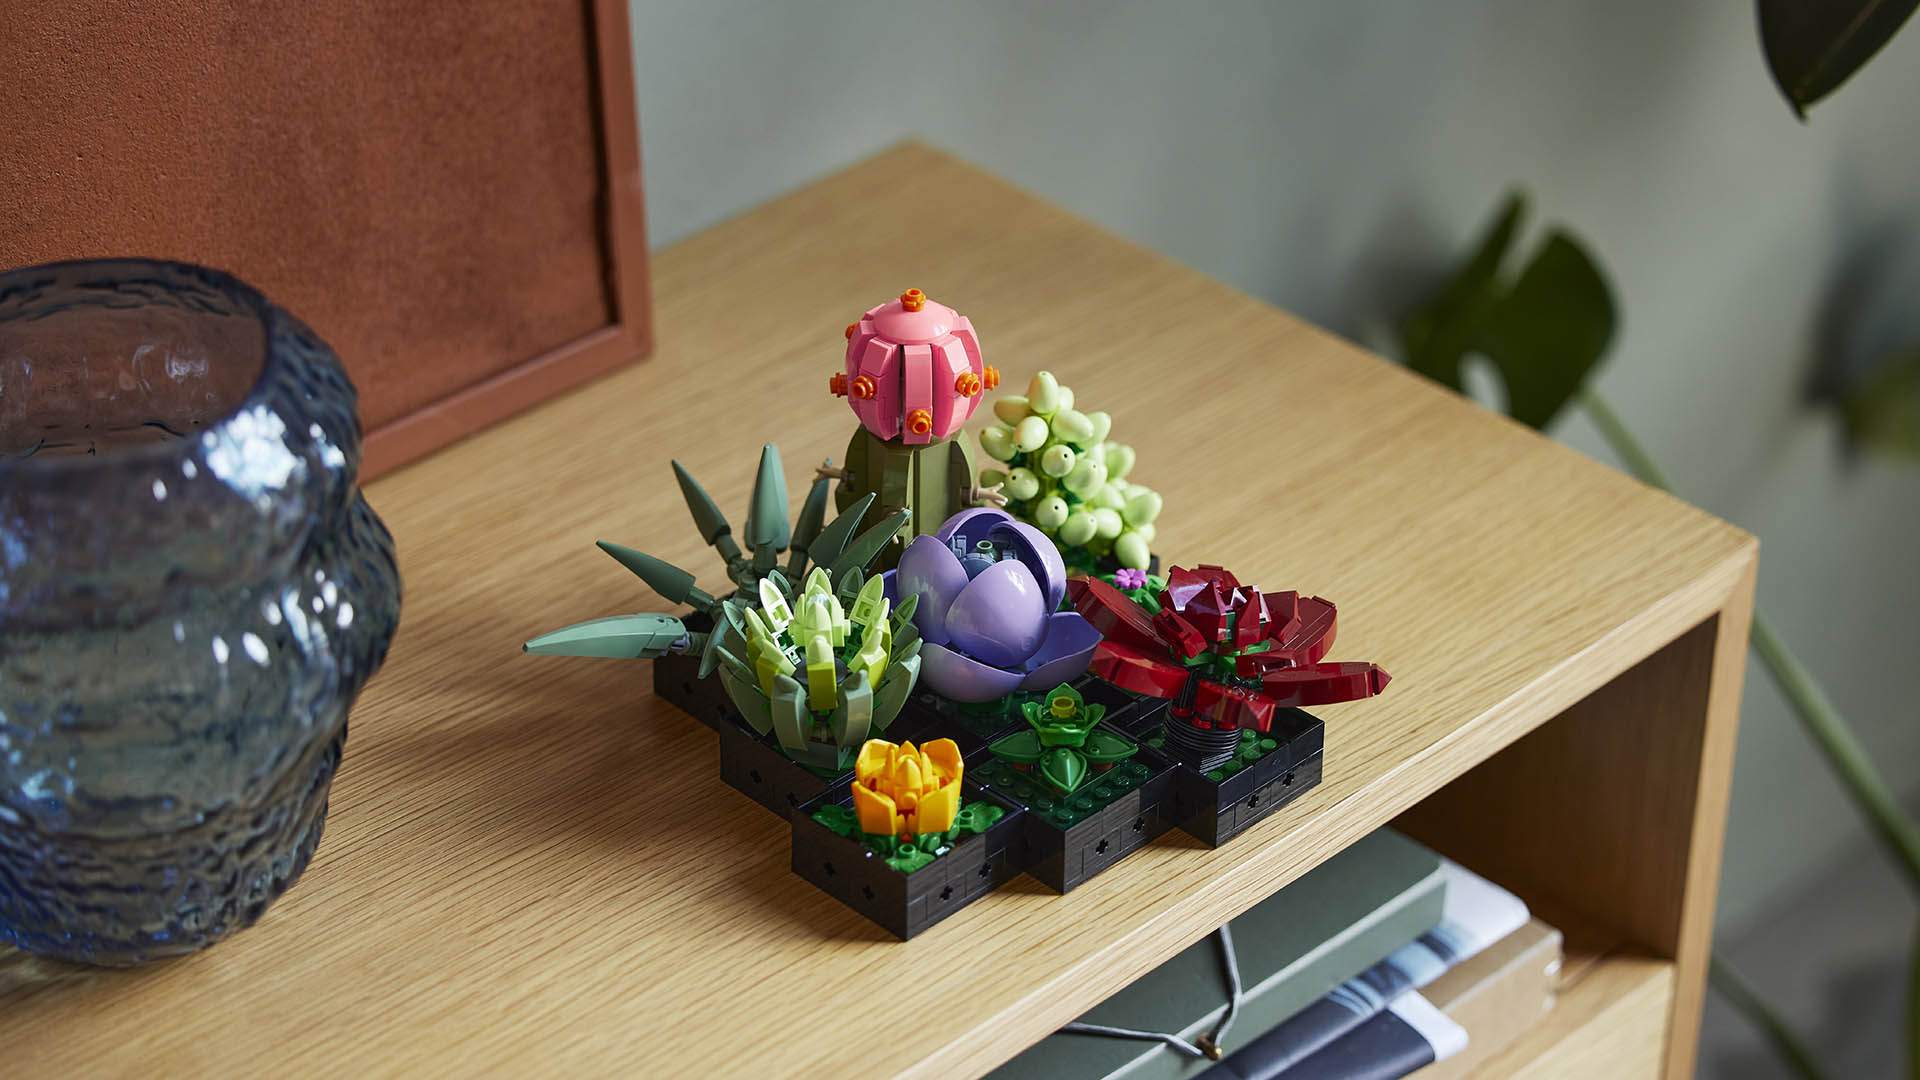 Lego's Latest Adorable Floral Kits Let You Build Succulents and Orchids That No One Can Kill